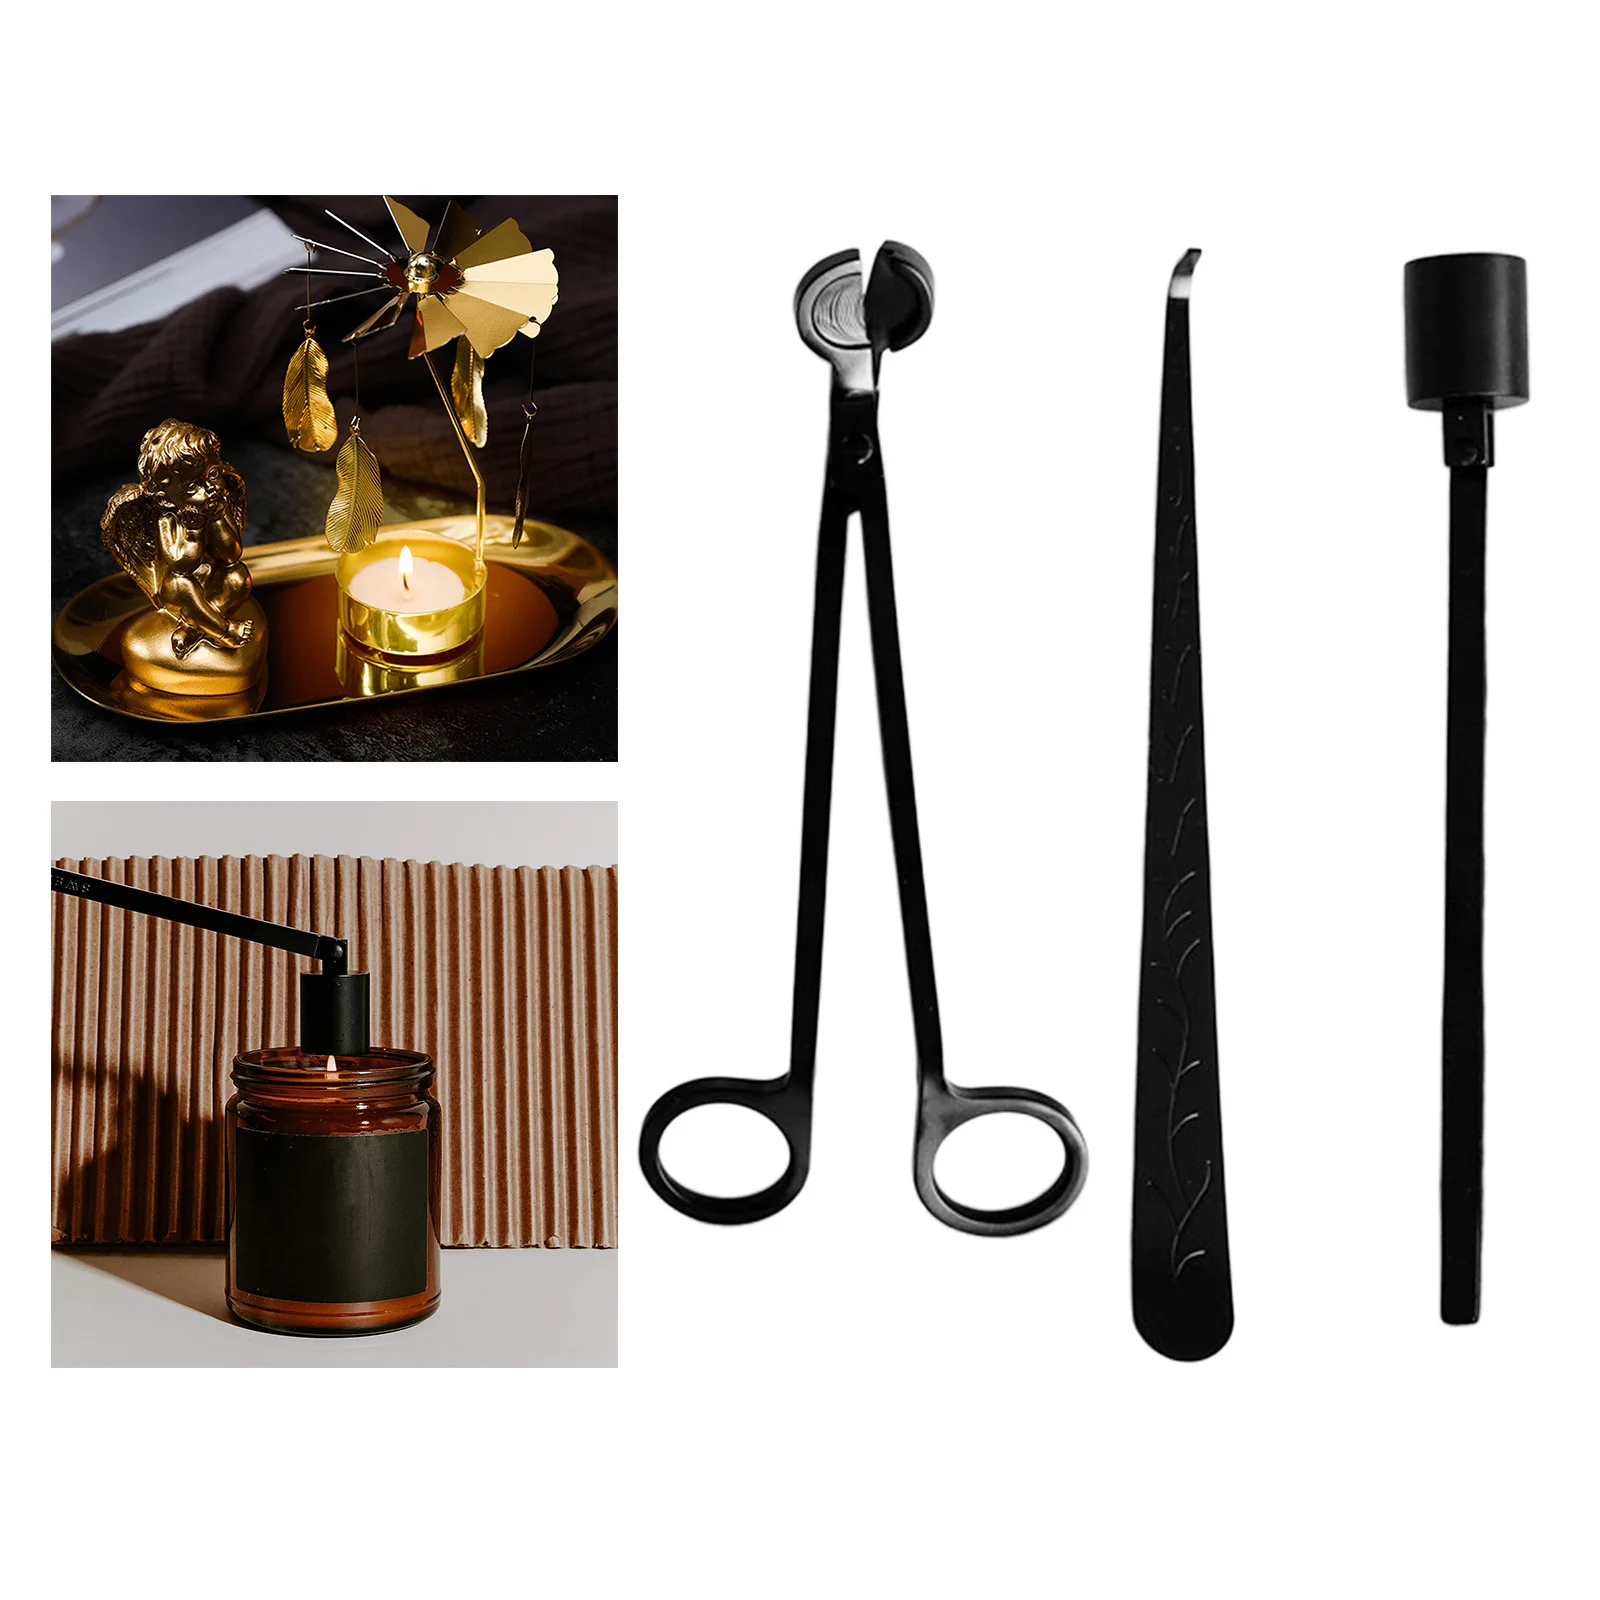 3Pcs/Set Black Candle Wick Trimmer Snuffer Dipper Candlewick Oil Lamp Cutter Hook Extinguish Tool Kit Accessory